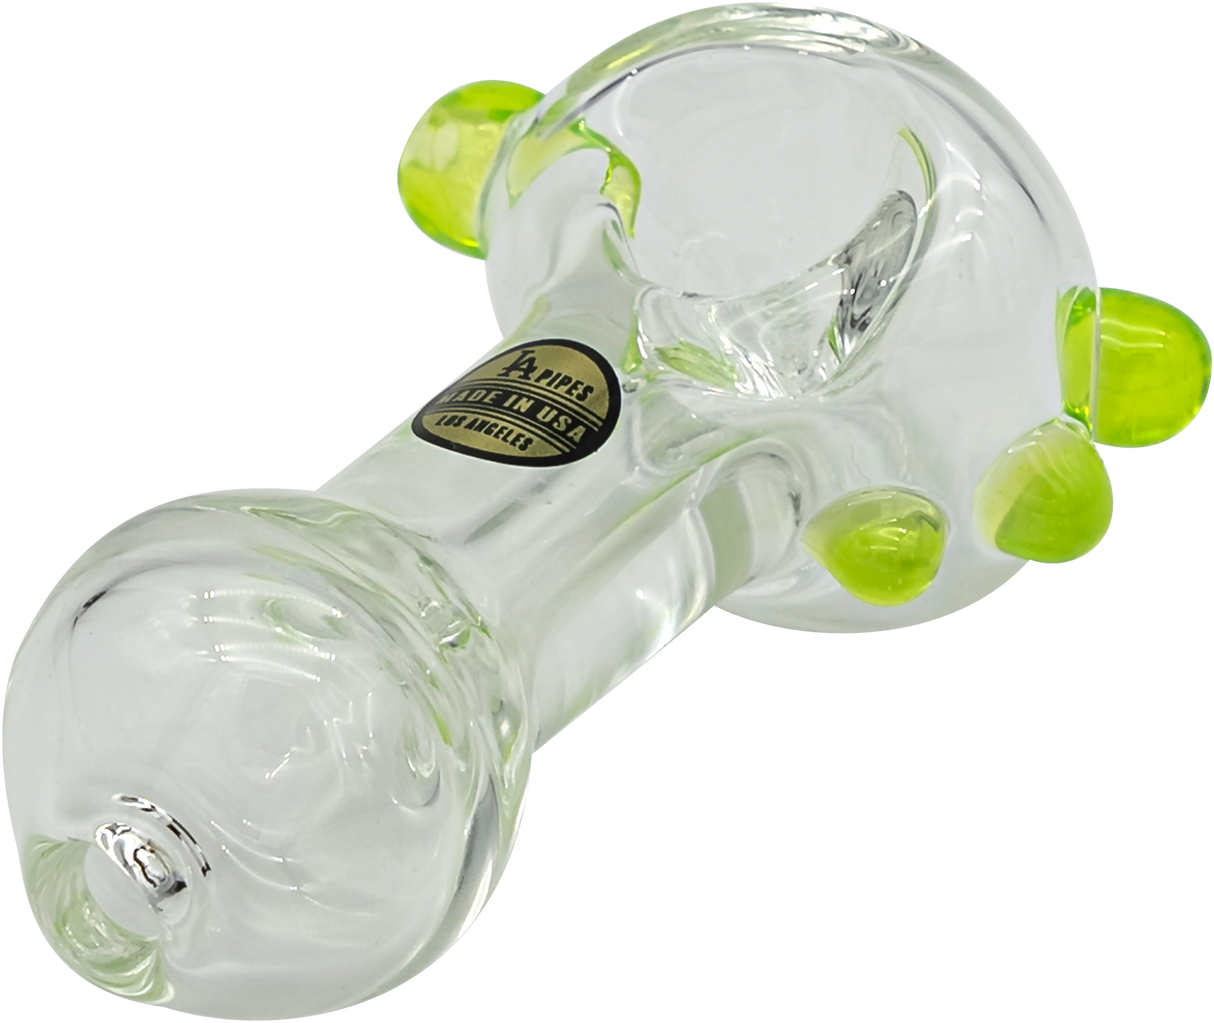 LA Pipes Thick Glass Spoon Pipe with Neon Green Accents - Angled Side View